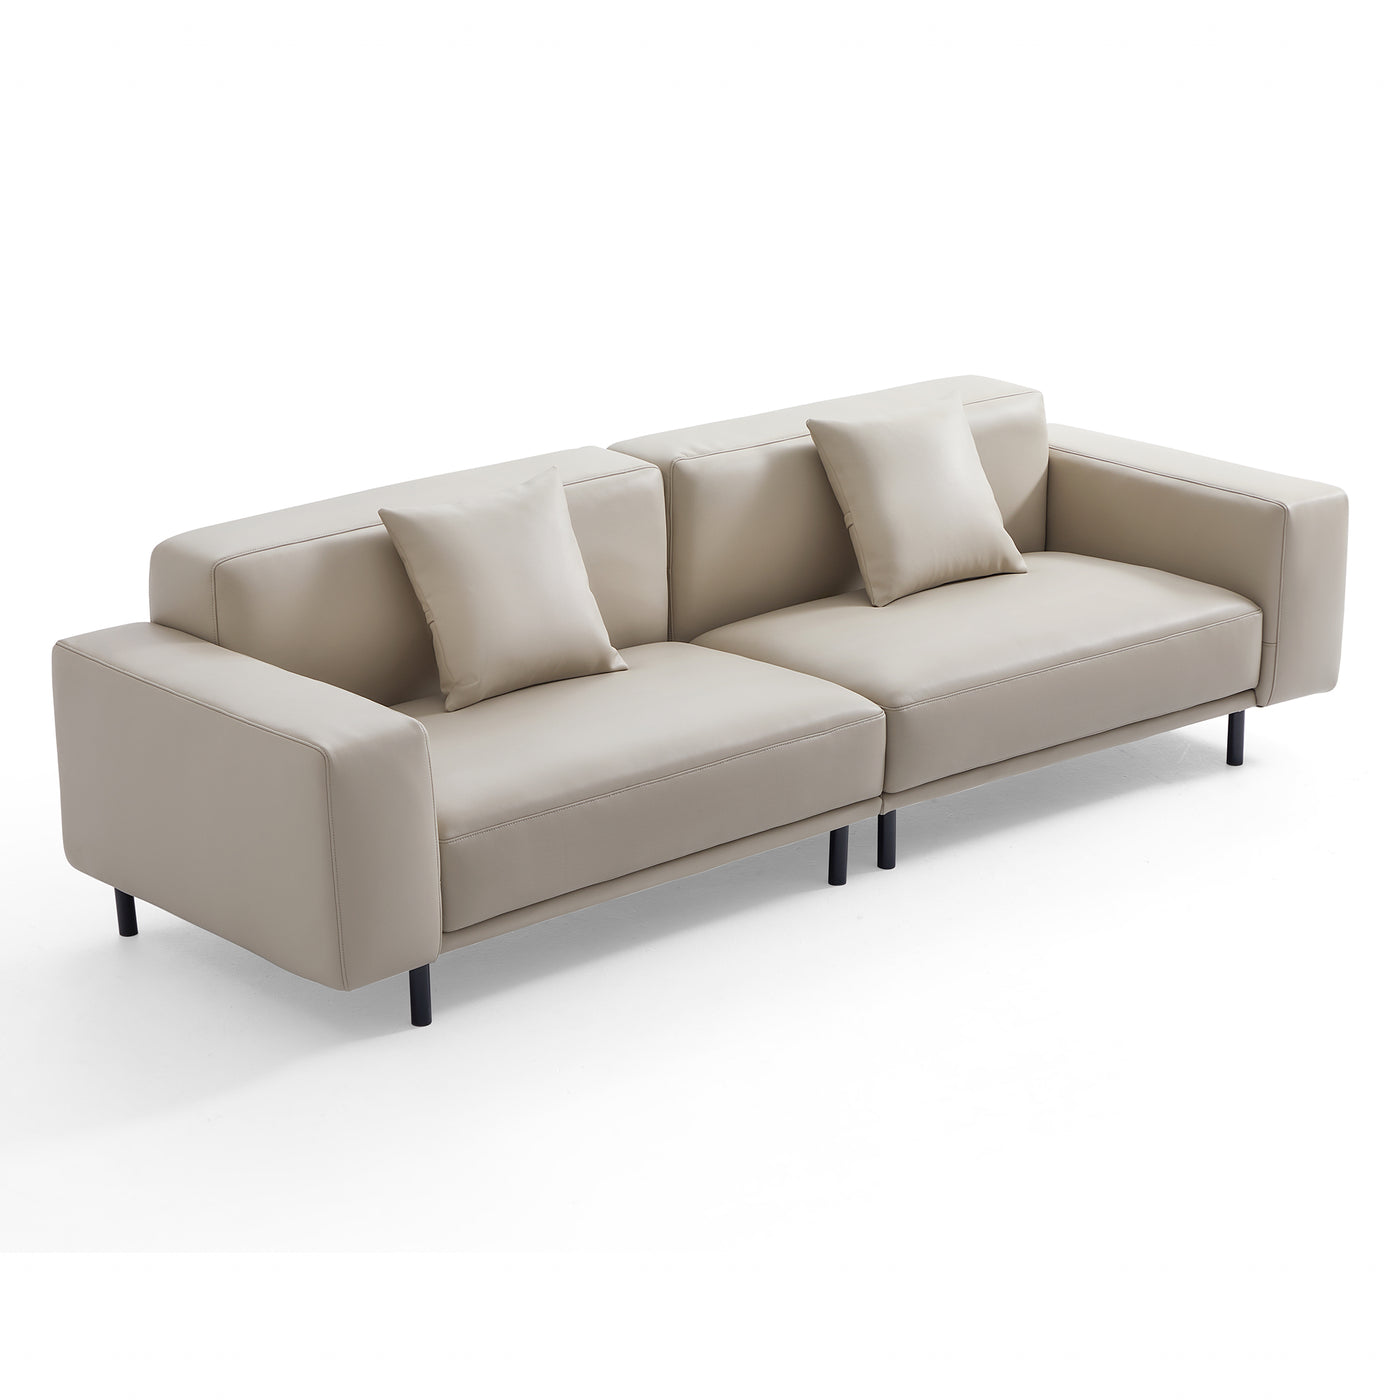 Noble Dark Gray Leather Sofa And Ottoman-Beige